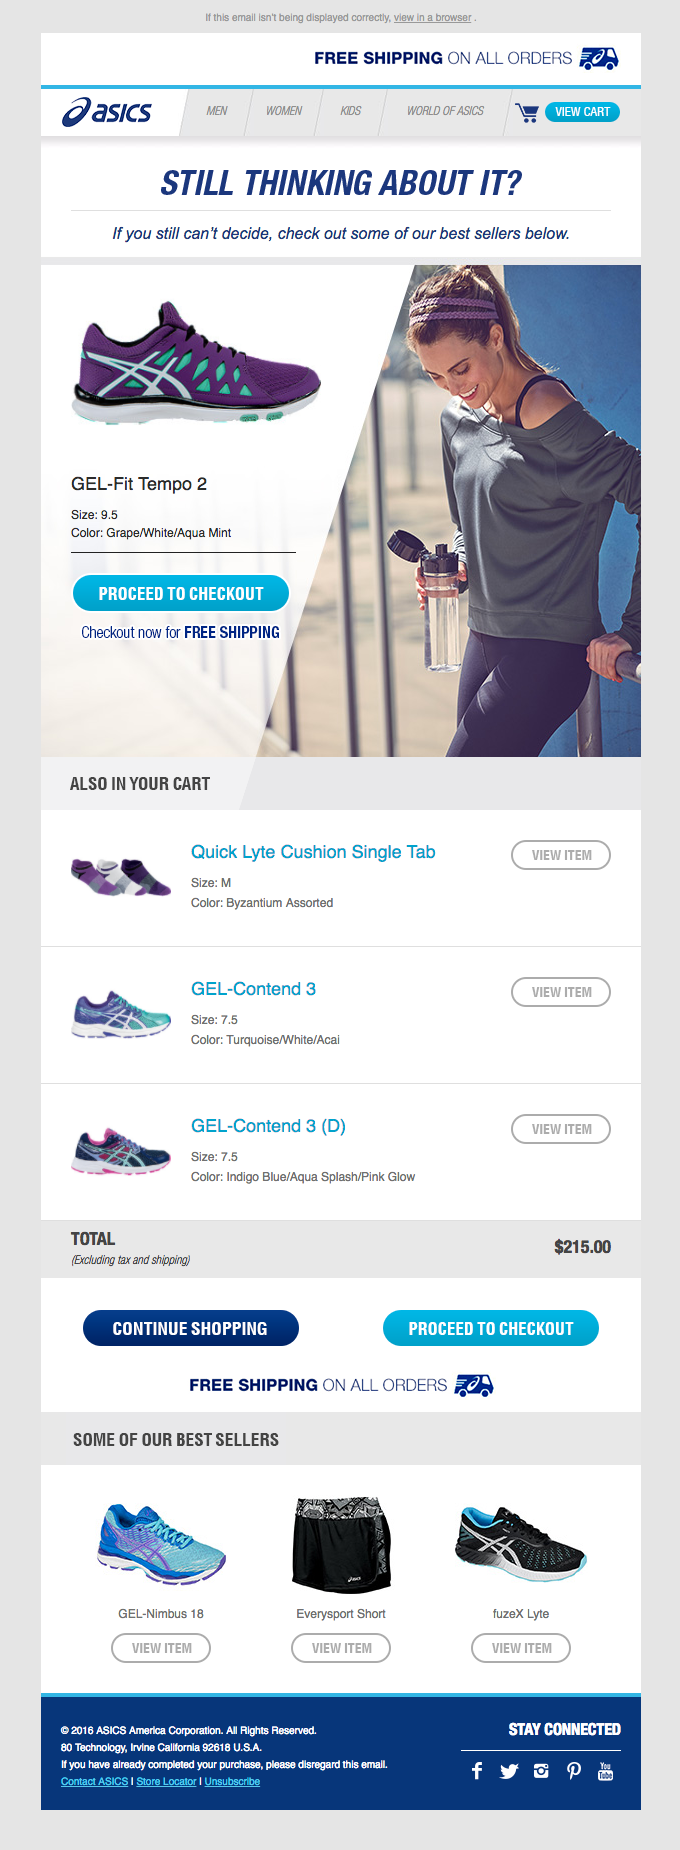 cross-selling in Asics email